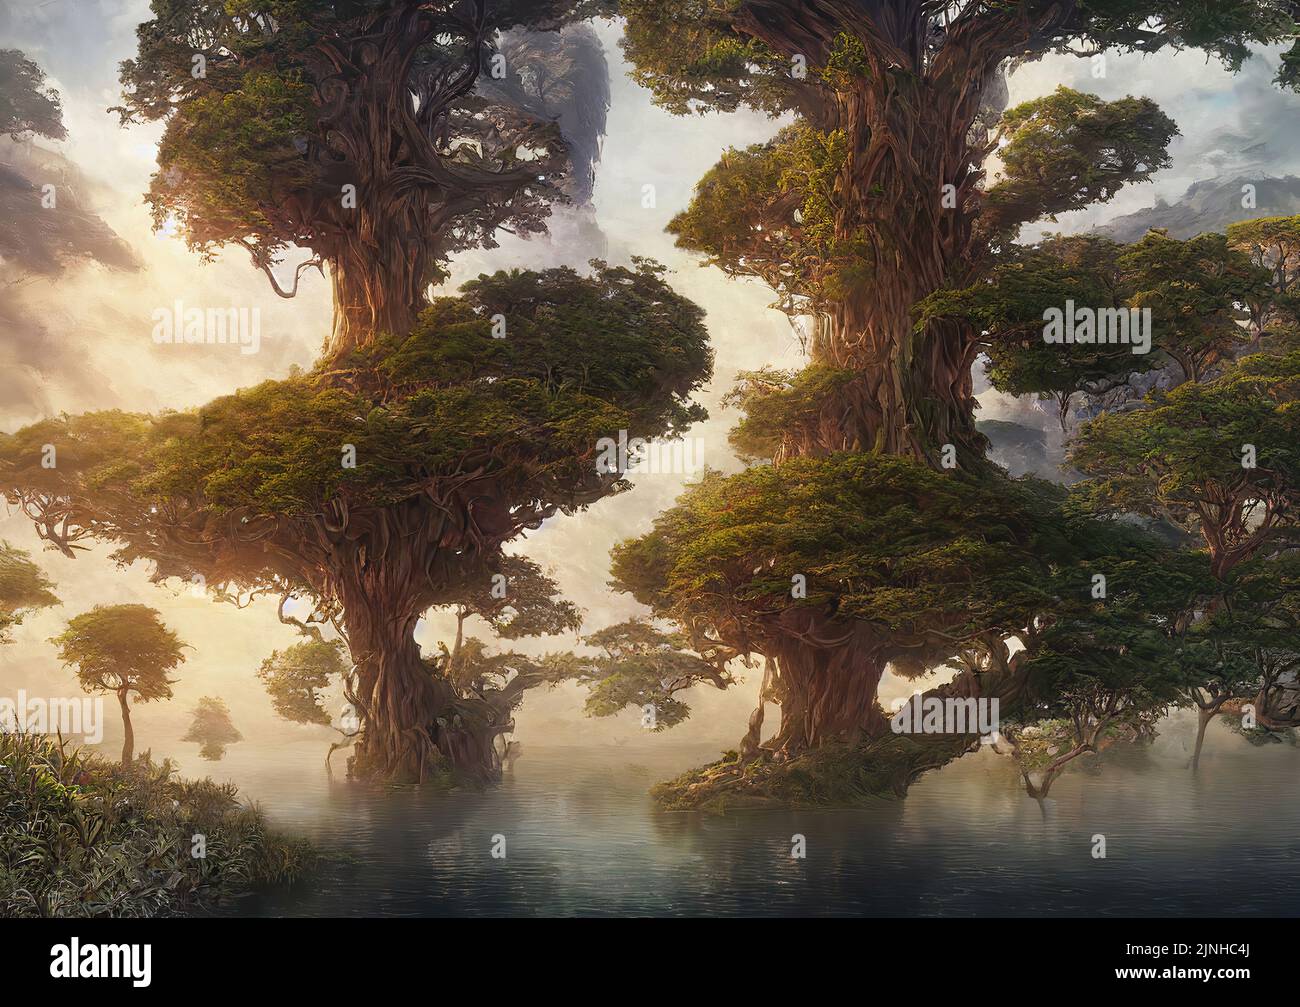 3d rendering of surreal beautiful fantasy land with giant trees growing in the middle of the lake surrounded by mountains Stock Photo